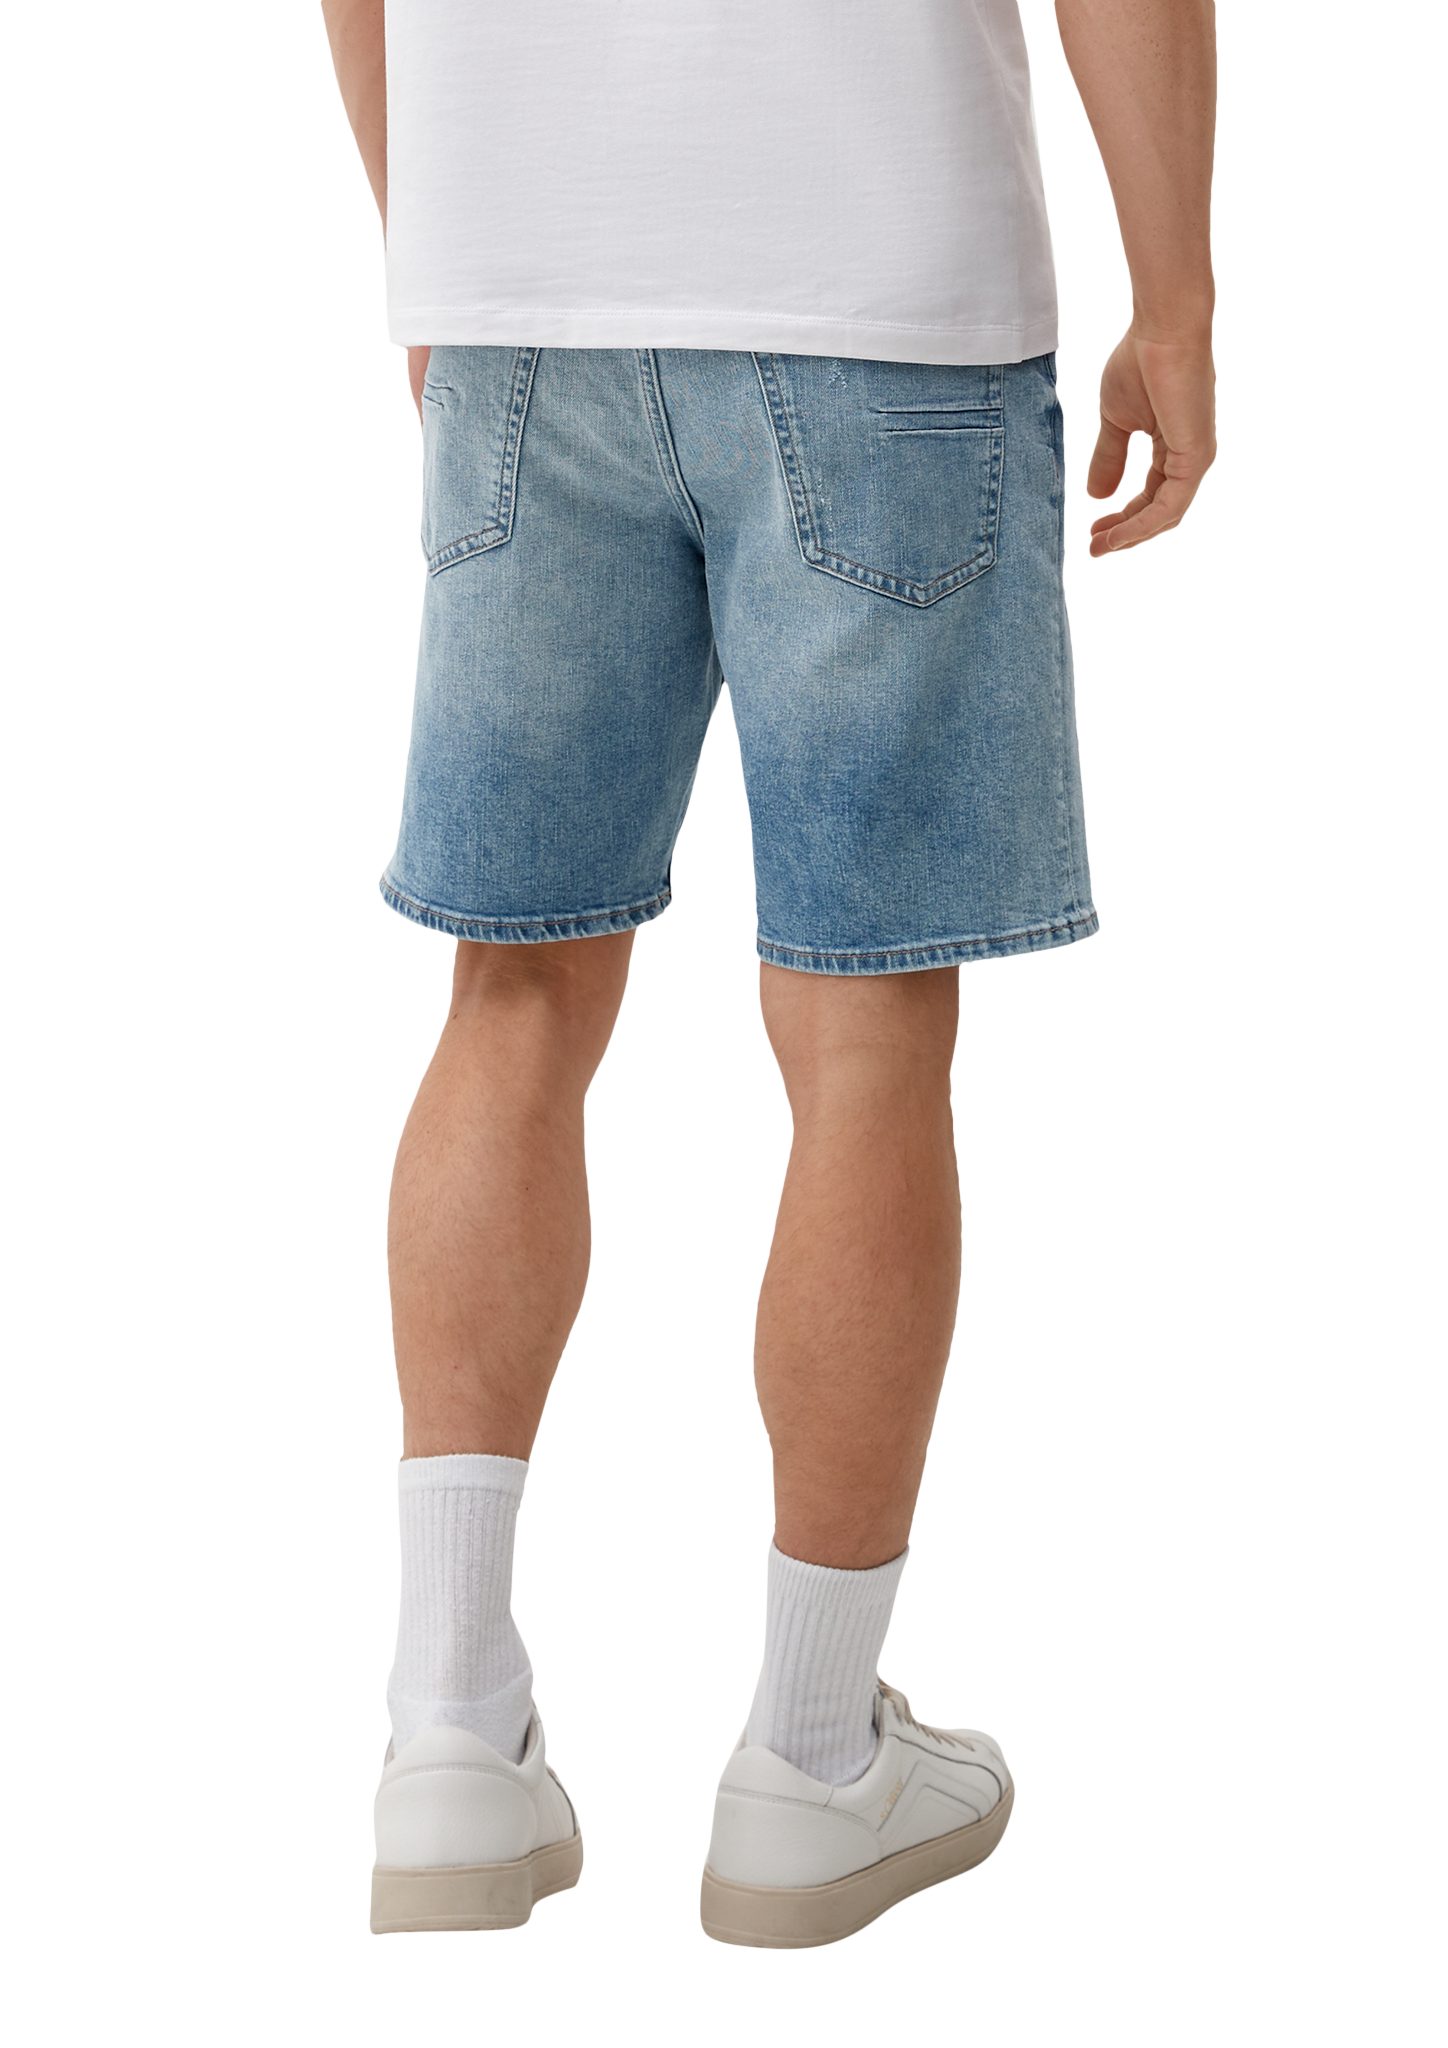 Jeansshorts Wide / Fit Rise / / Leg Mid s.Oliver Jeans-Shorts Relaxed Waschung